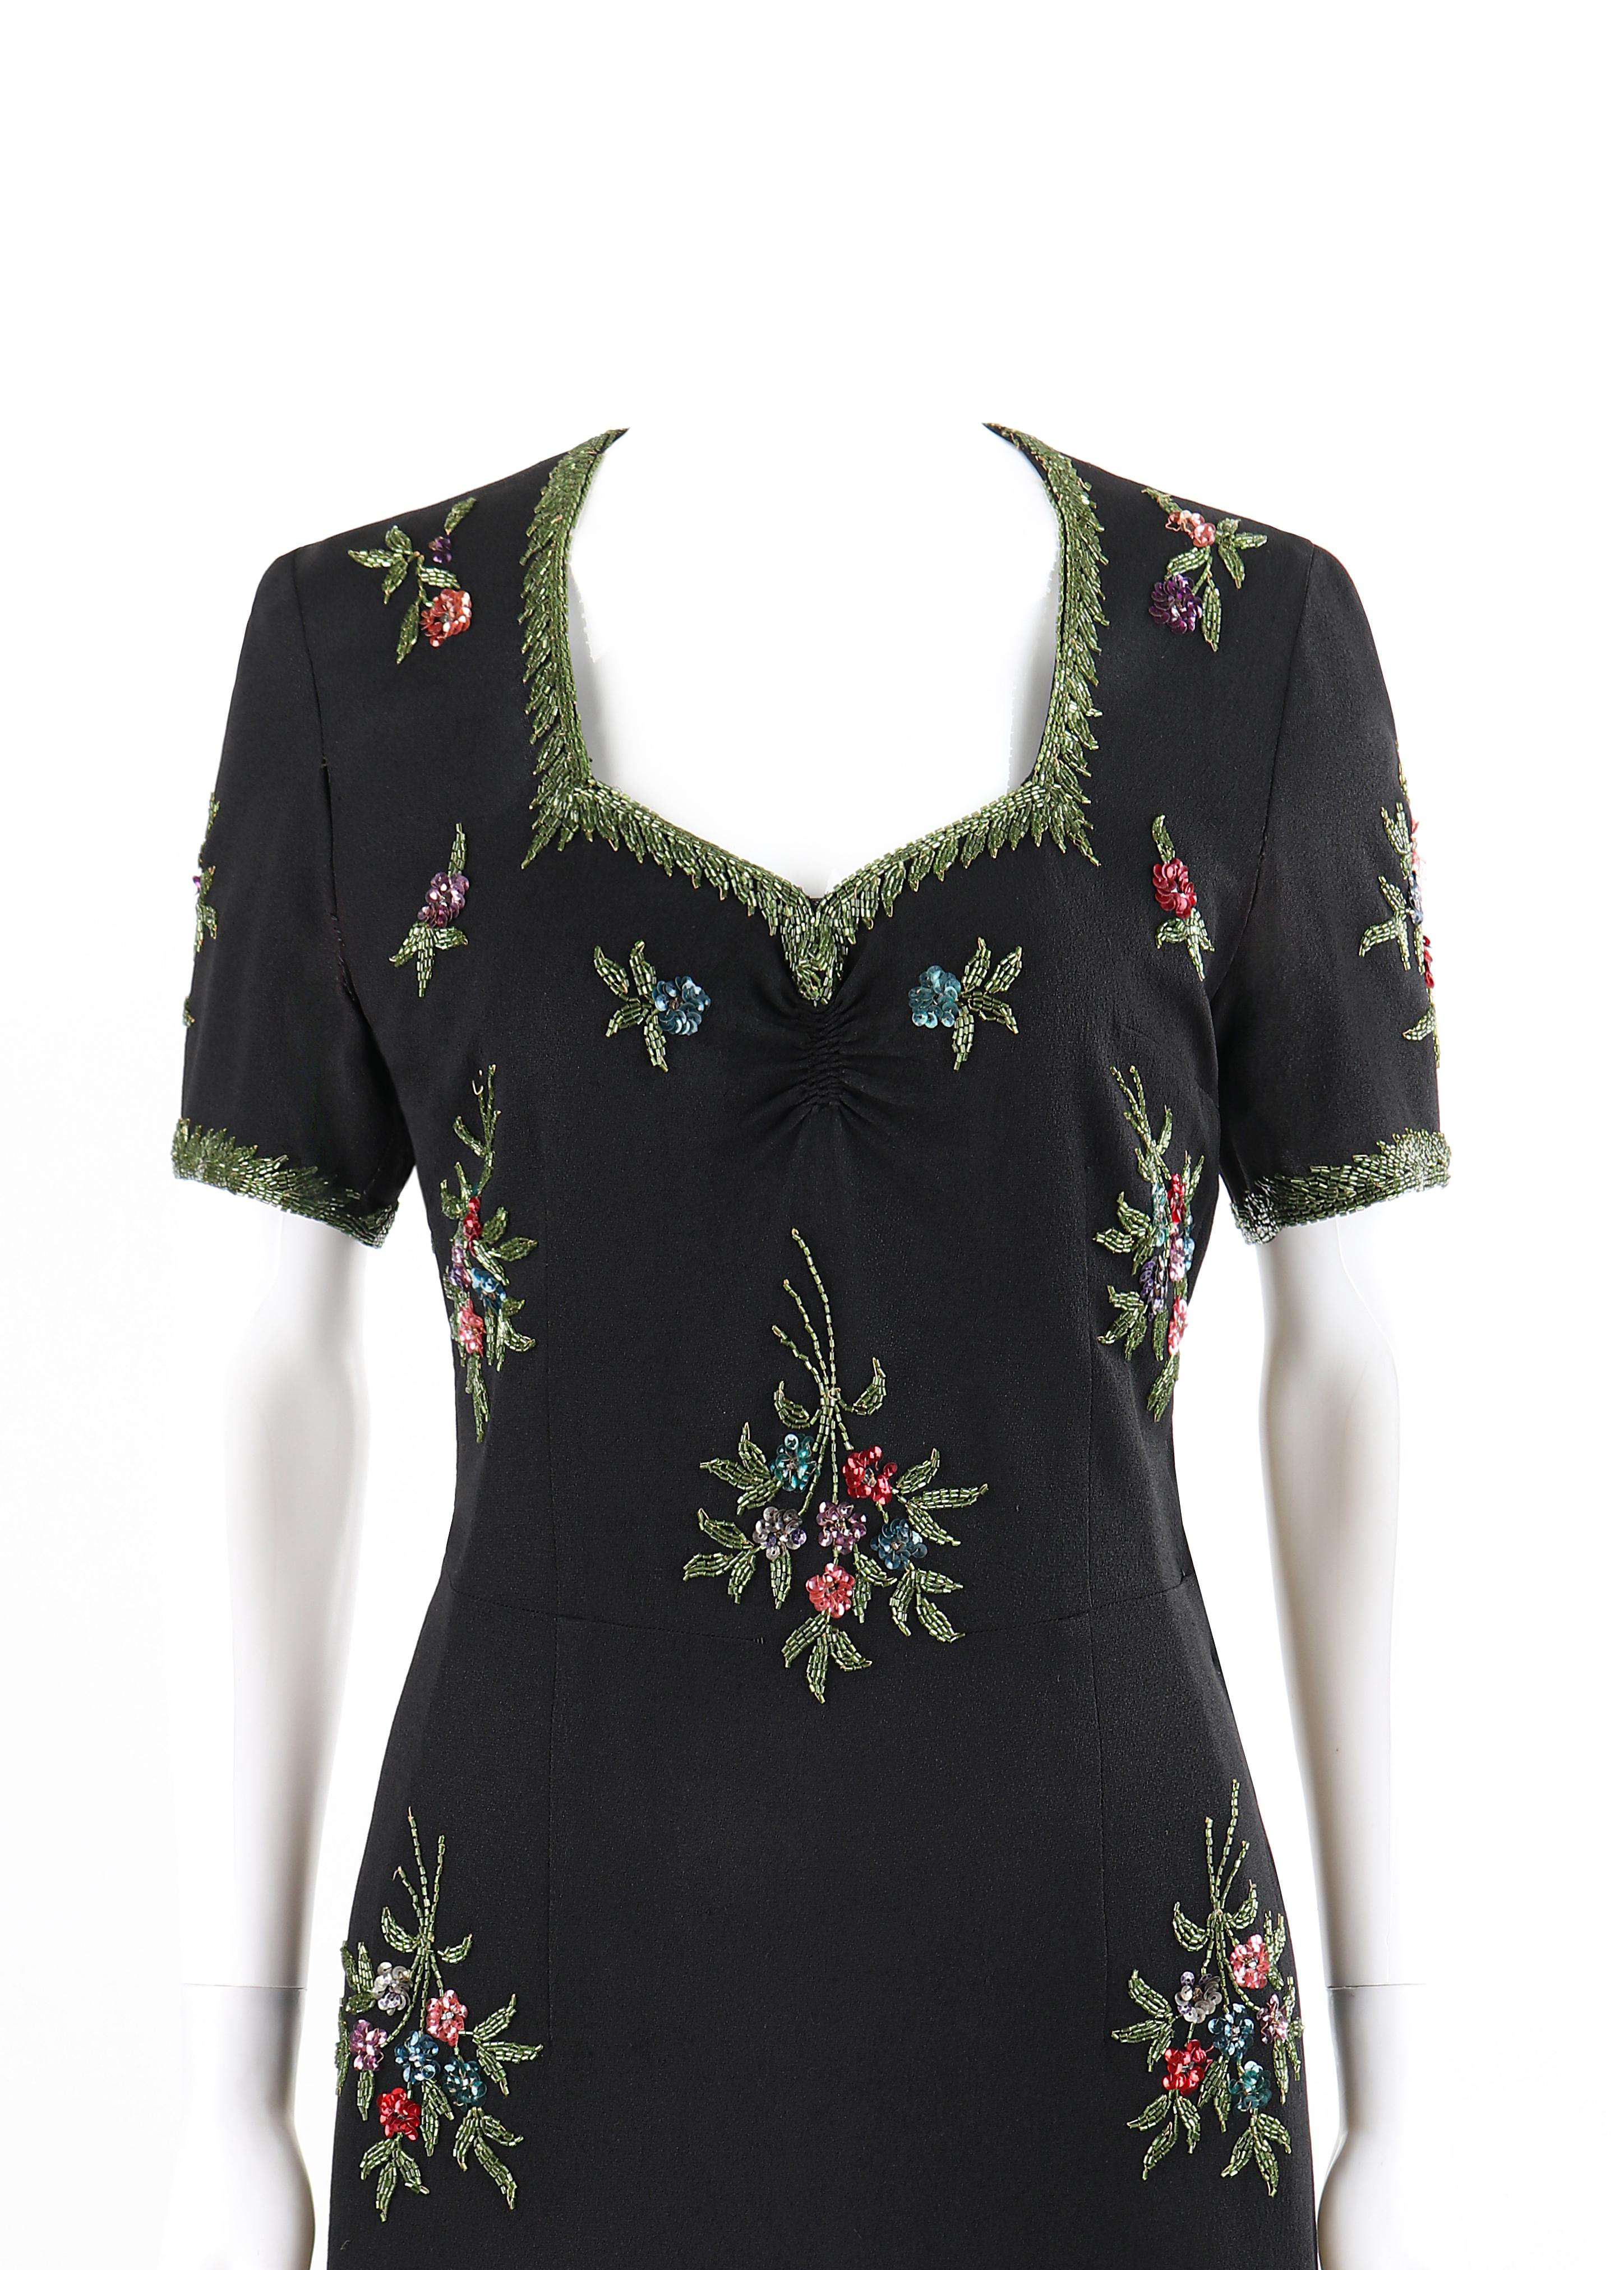 Couture c. 1940’s Black Multicolor Floral Glass Bead Embroidered Shift Dress
 
Circa: 1940’s 
Style: Shift dress
Color(s): Shades of black (body), blue, pink, purple, and green (beads)
Lined: No
Unmarked Fabric Content (feel of): Rayon crepe; glass